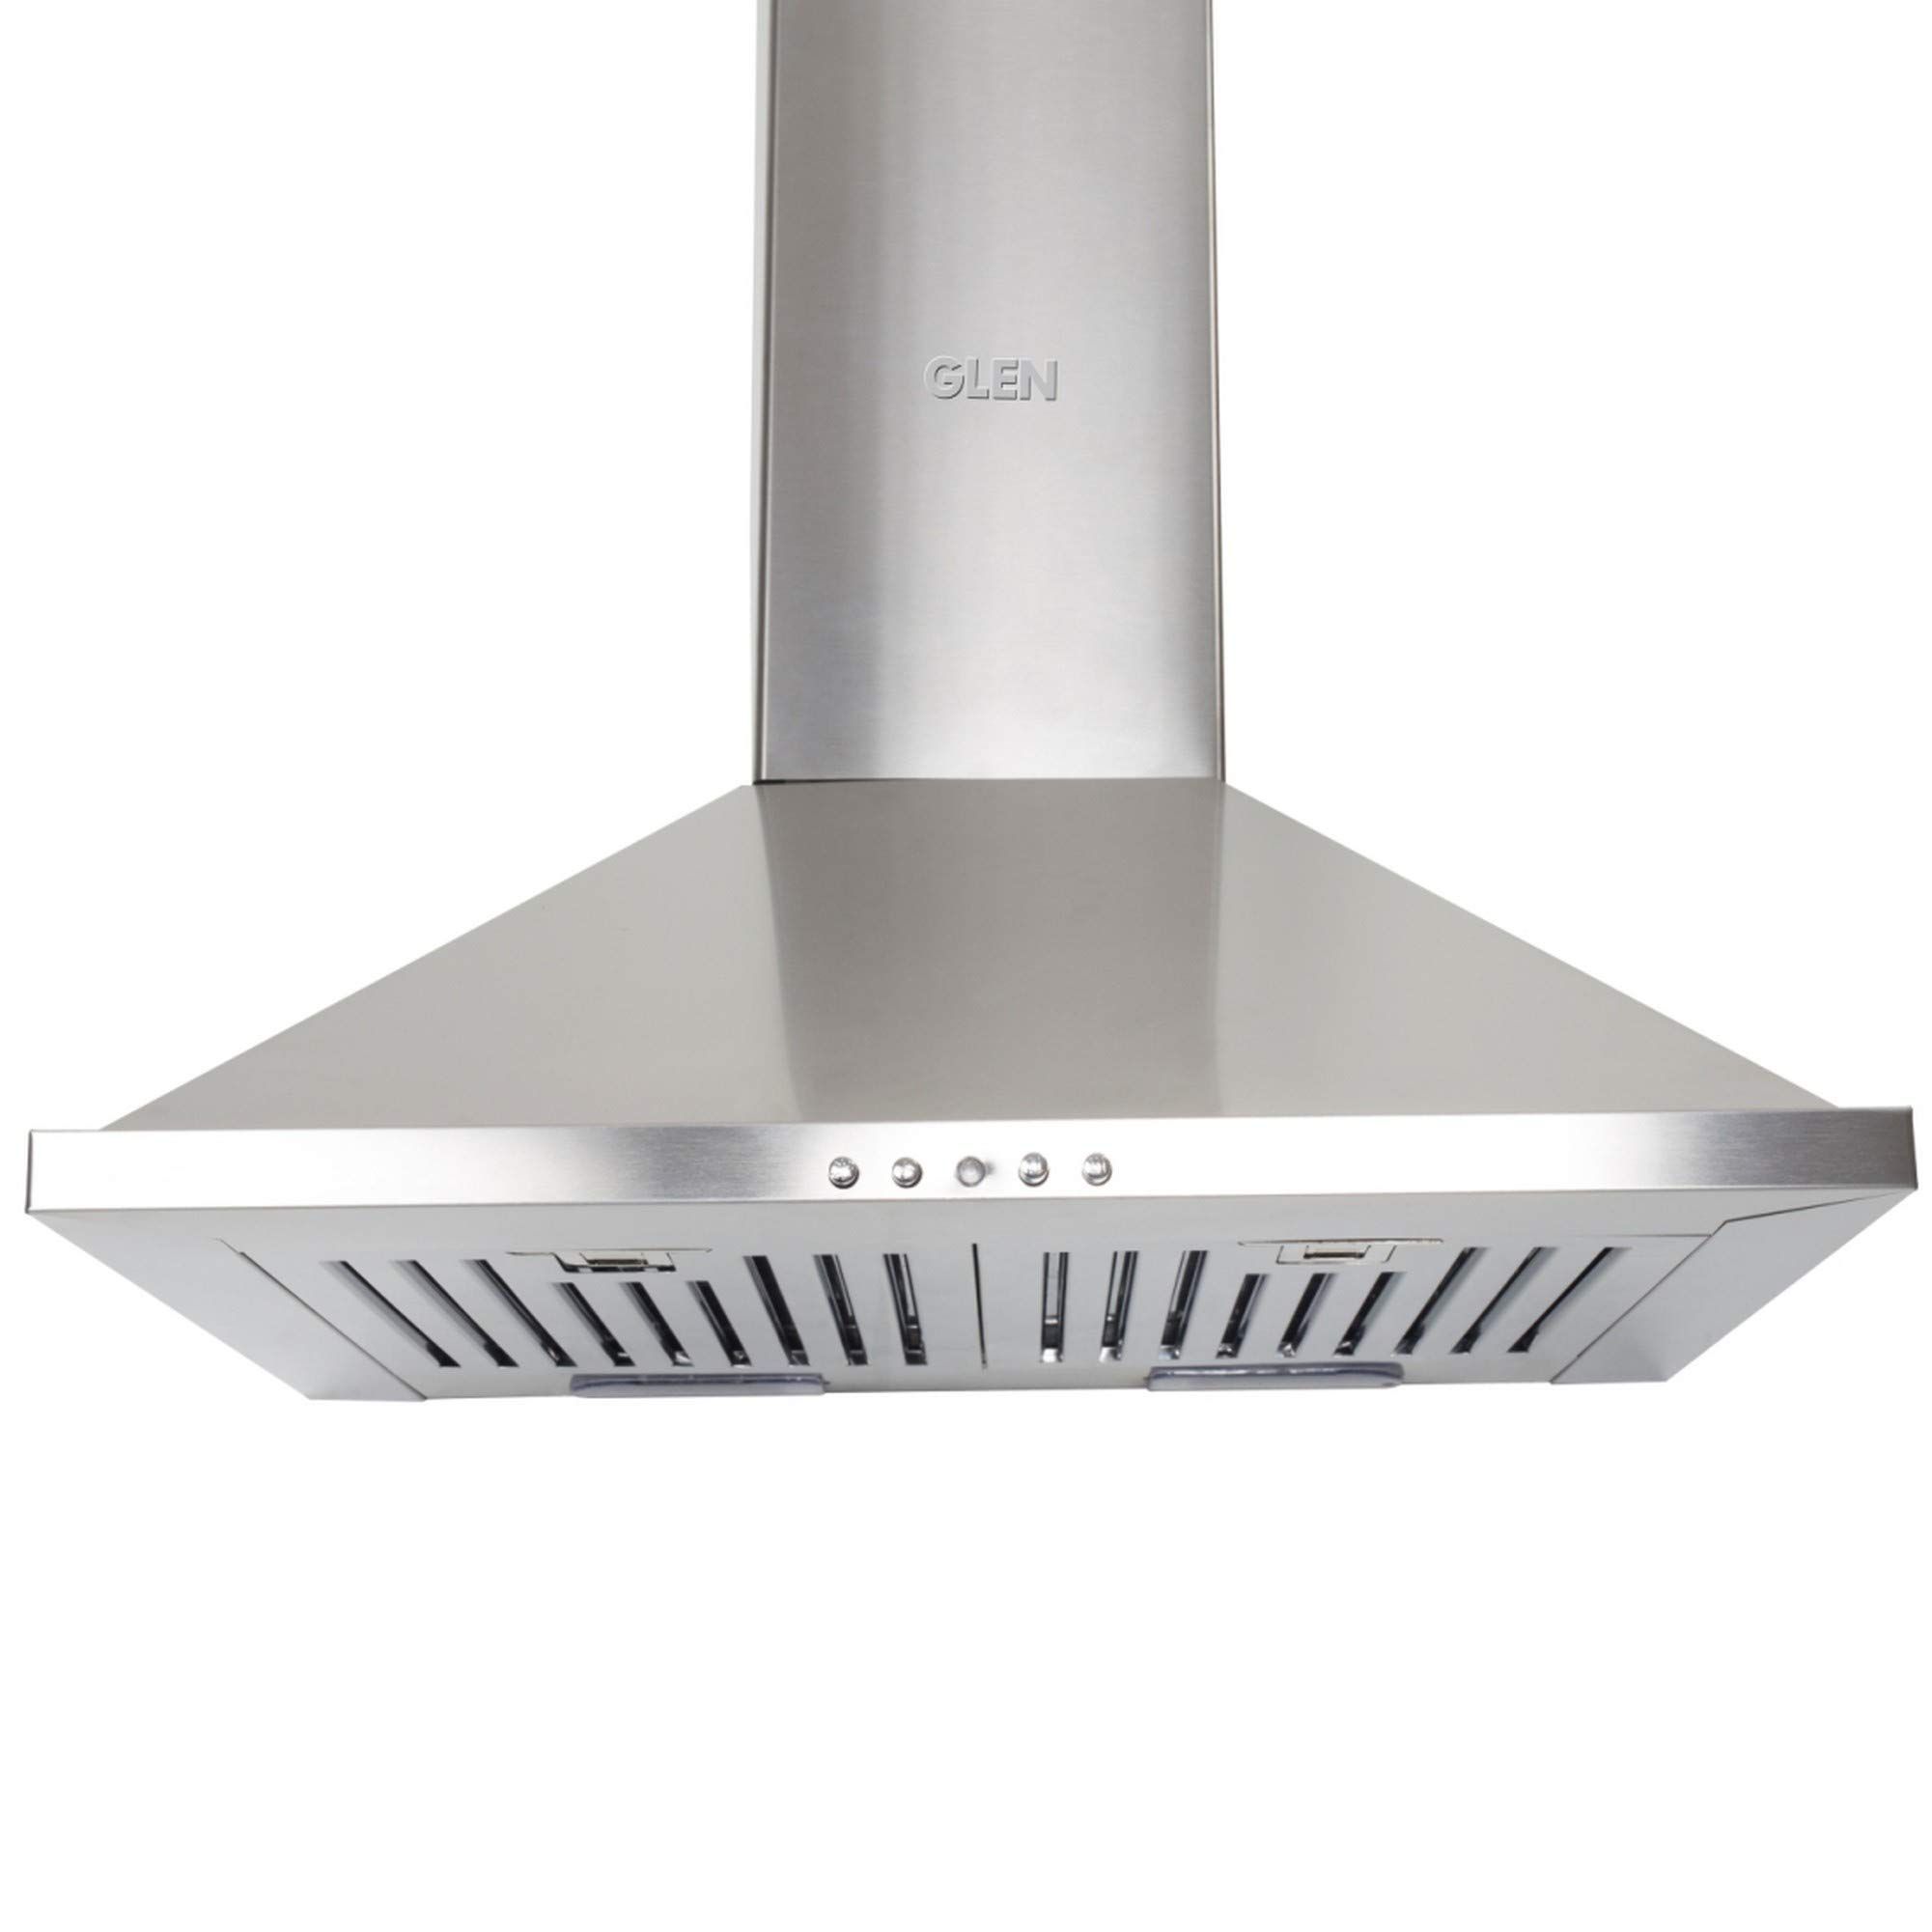 Glen 60 cm 1000 m3/hr Pyramid Chimney With 7 years warranty on Product, Baffle Filters Push buttons (Aqua SS, Silver)